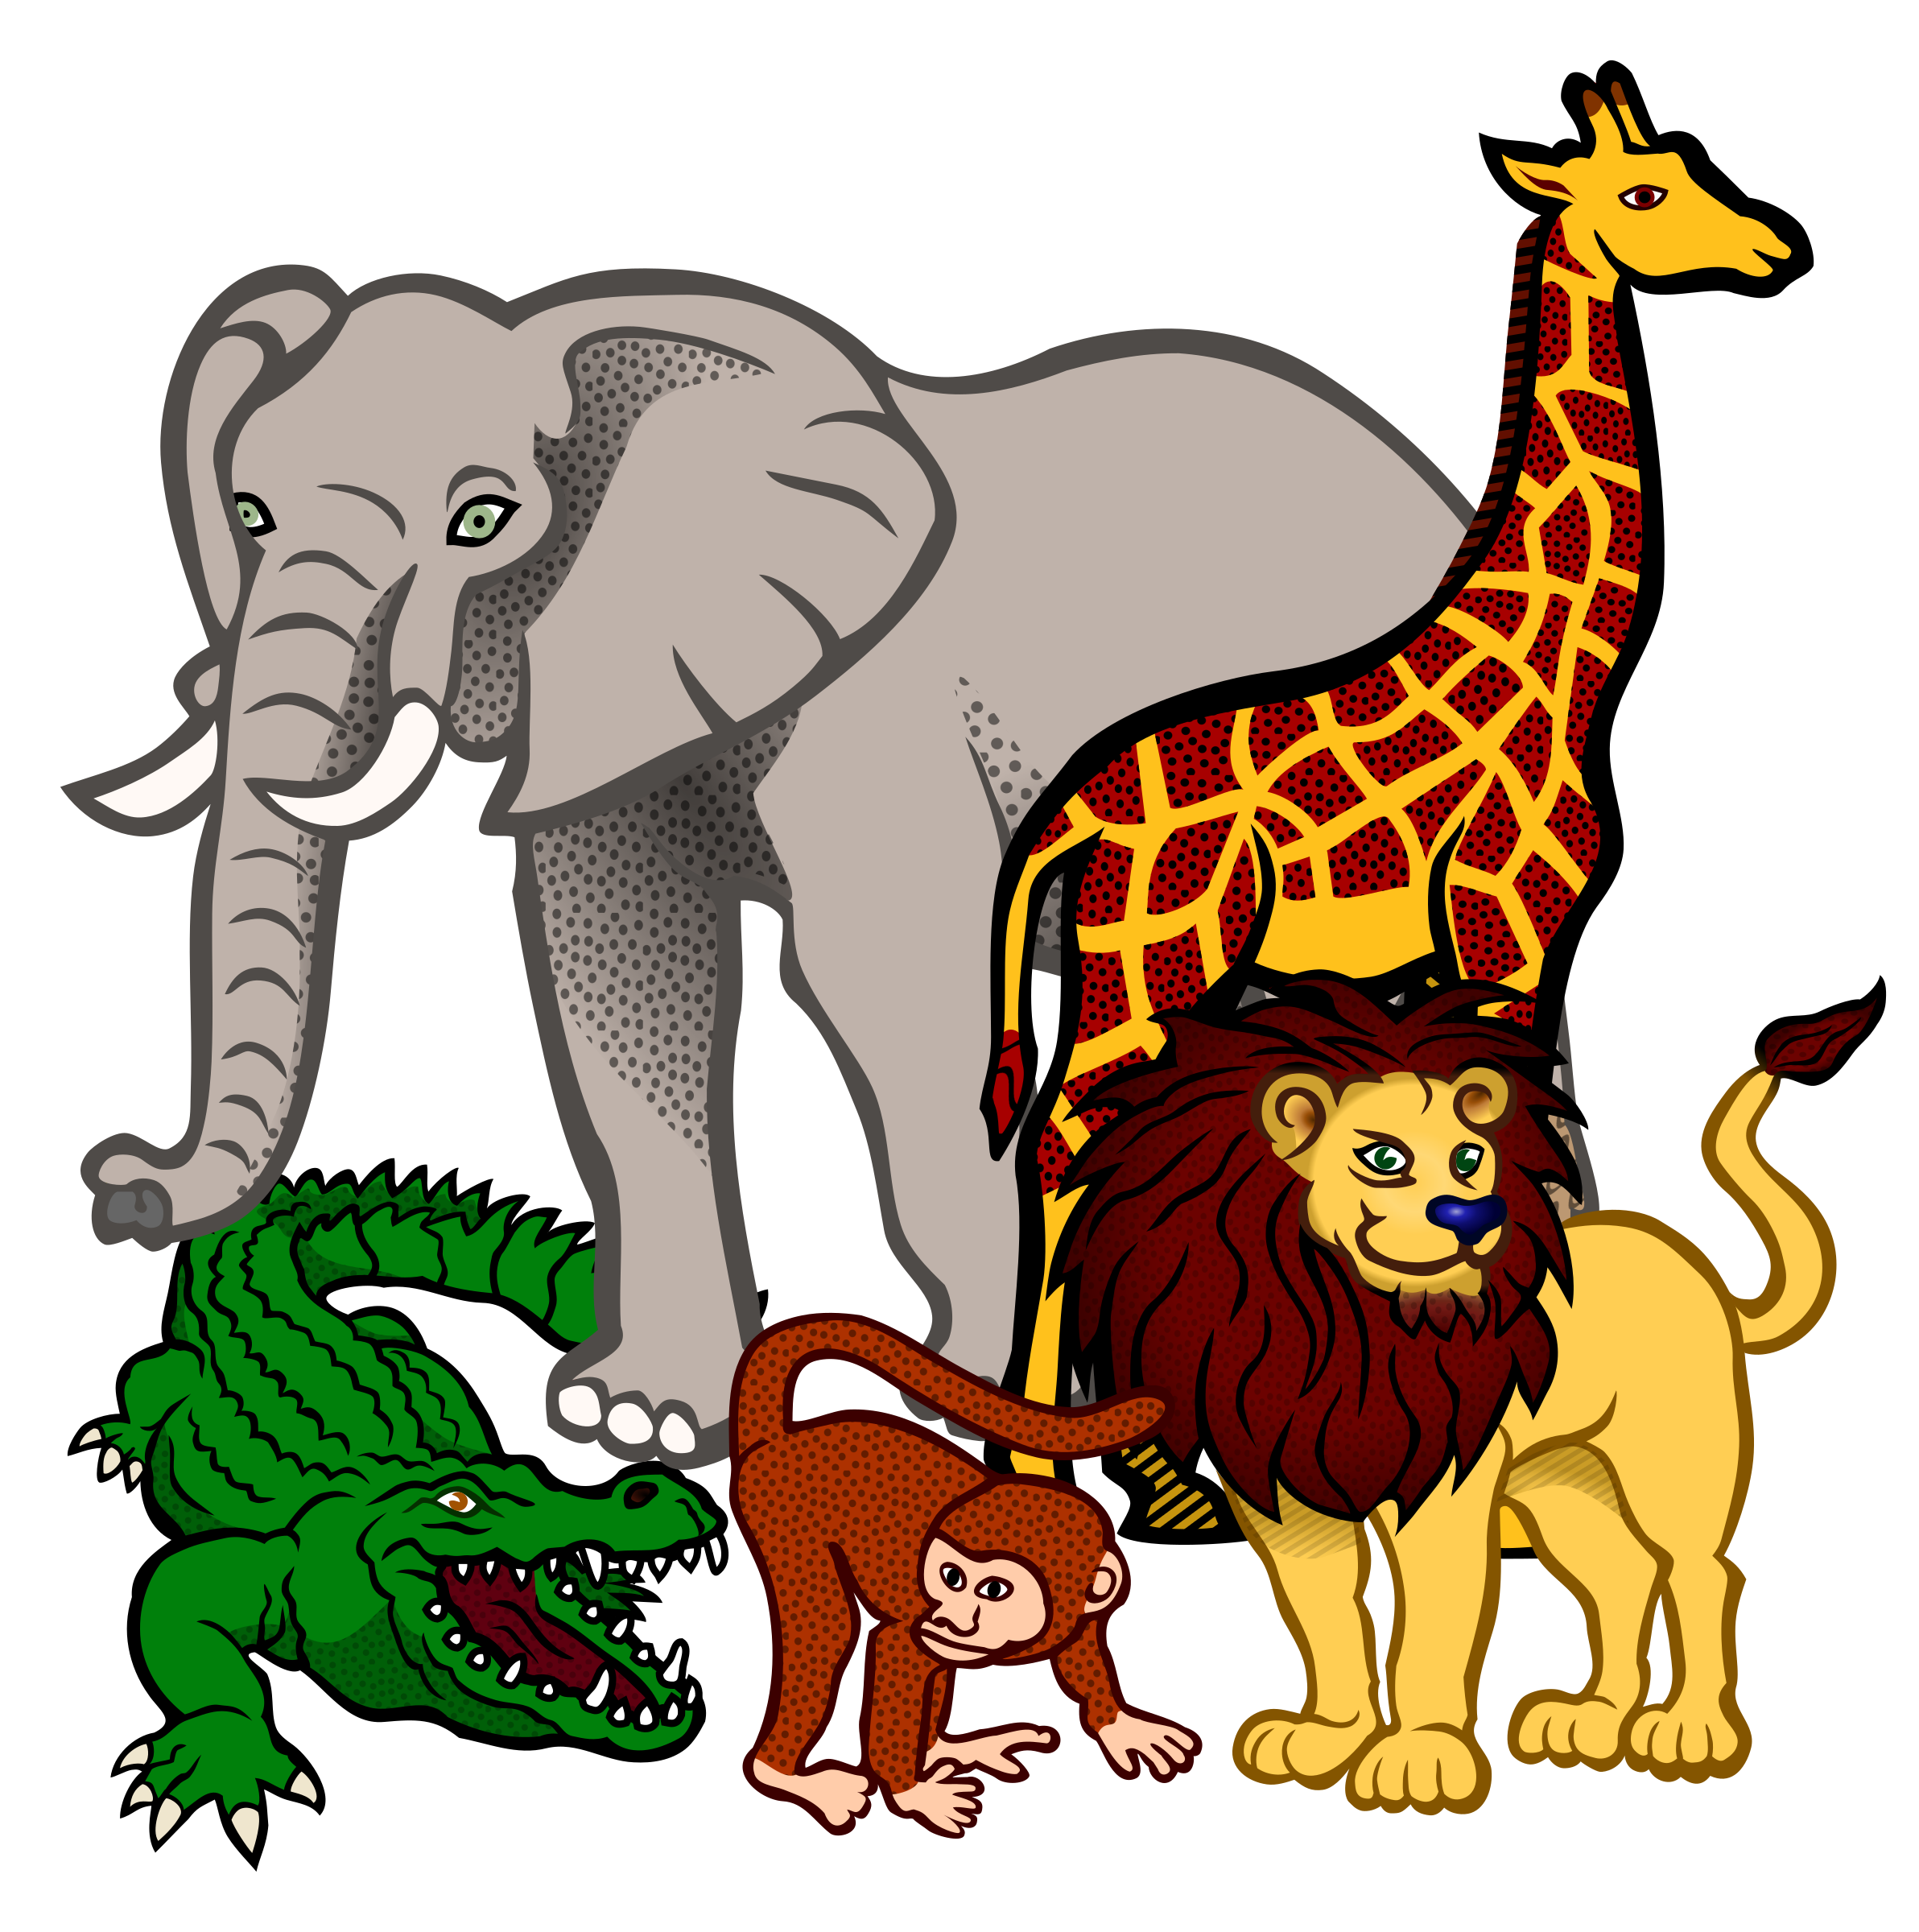 Cartoon Jungle Animals Clipart | Free download on ClipArtMag